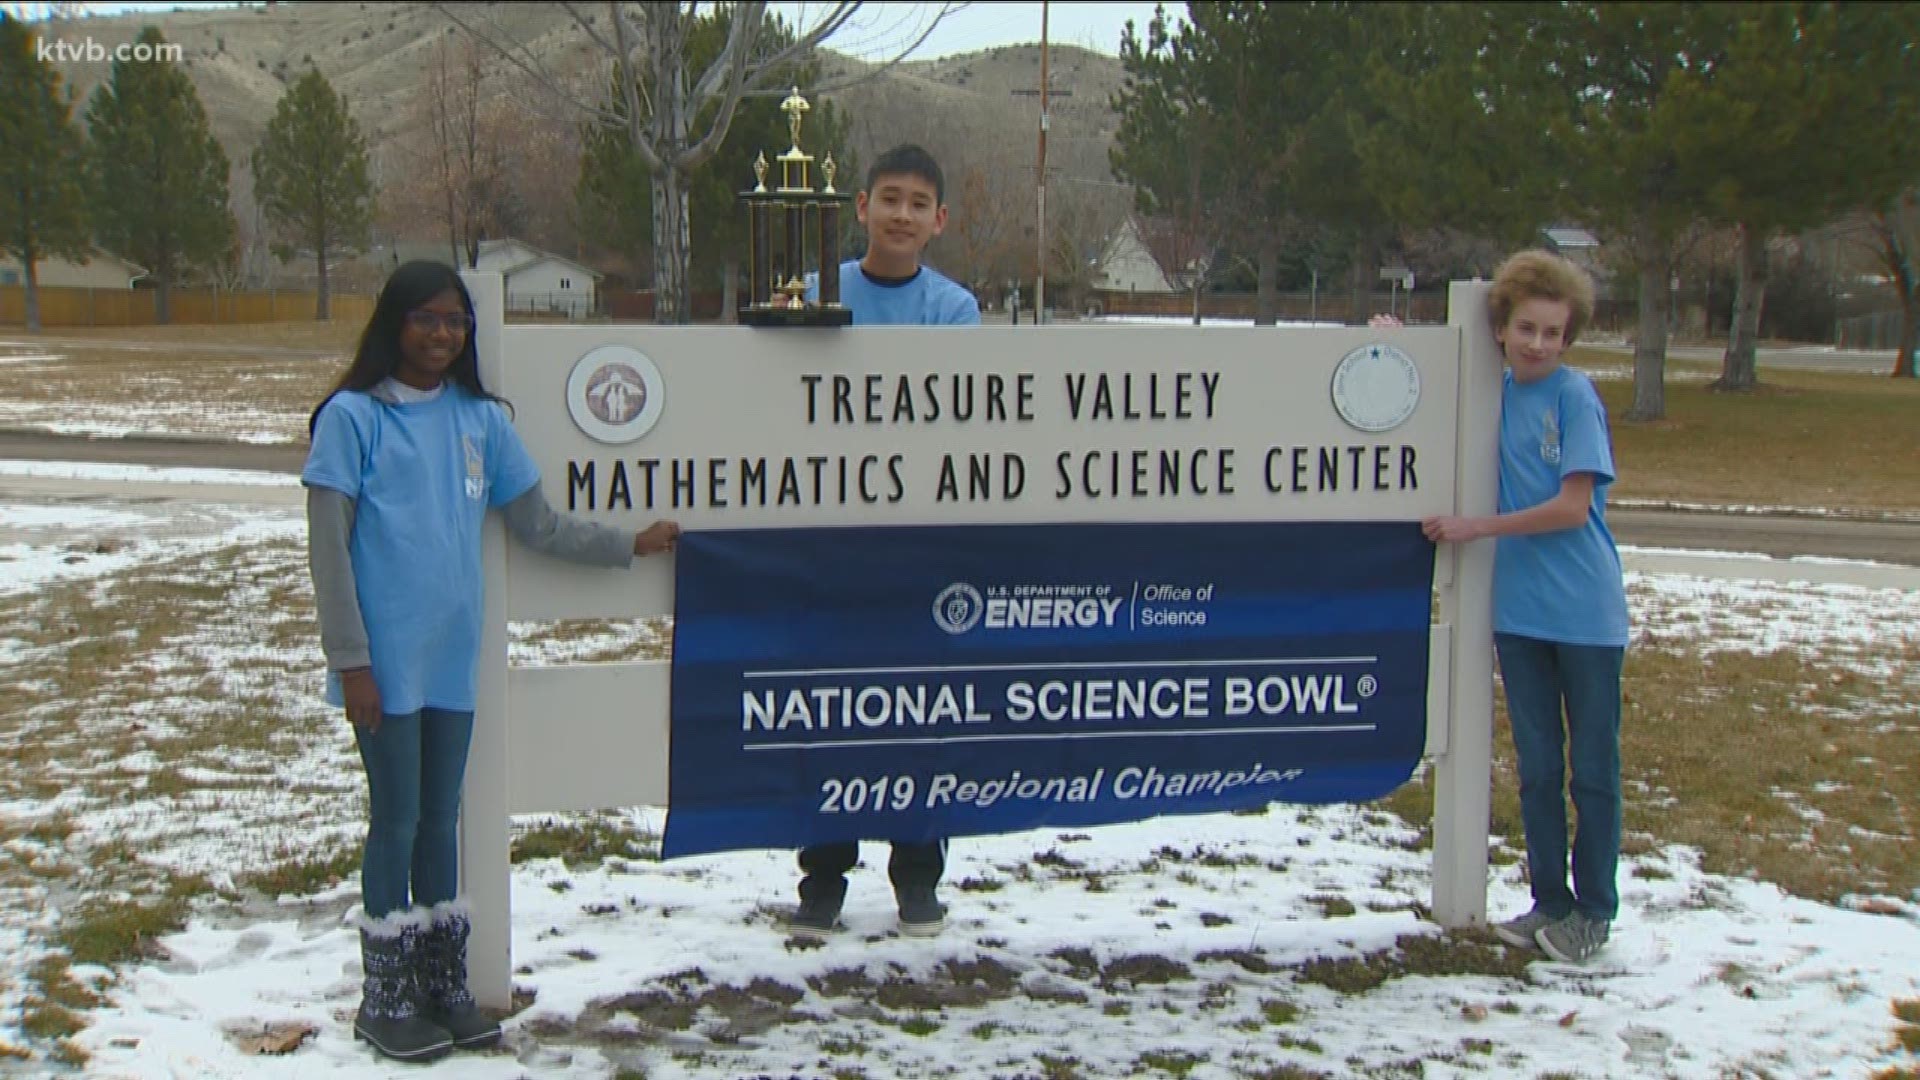 The team from Treasure Valley Math and Science Center took the regional Science Bowl title over the weekend, beating teams from across the Northwest